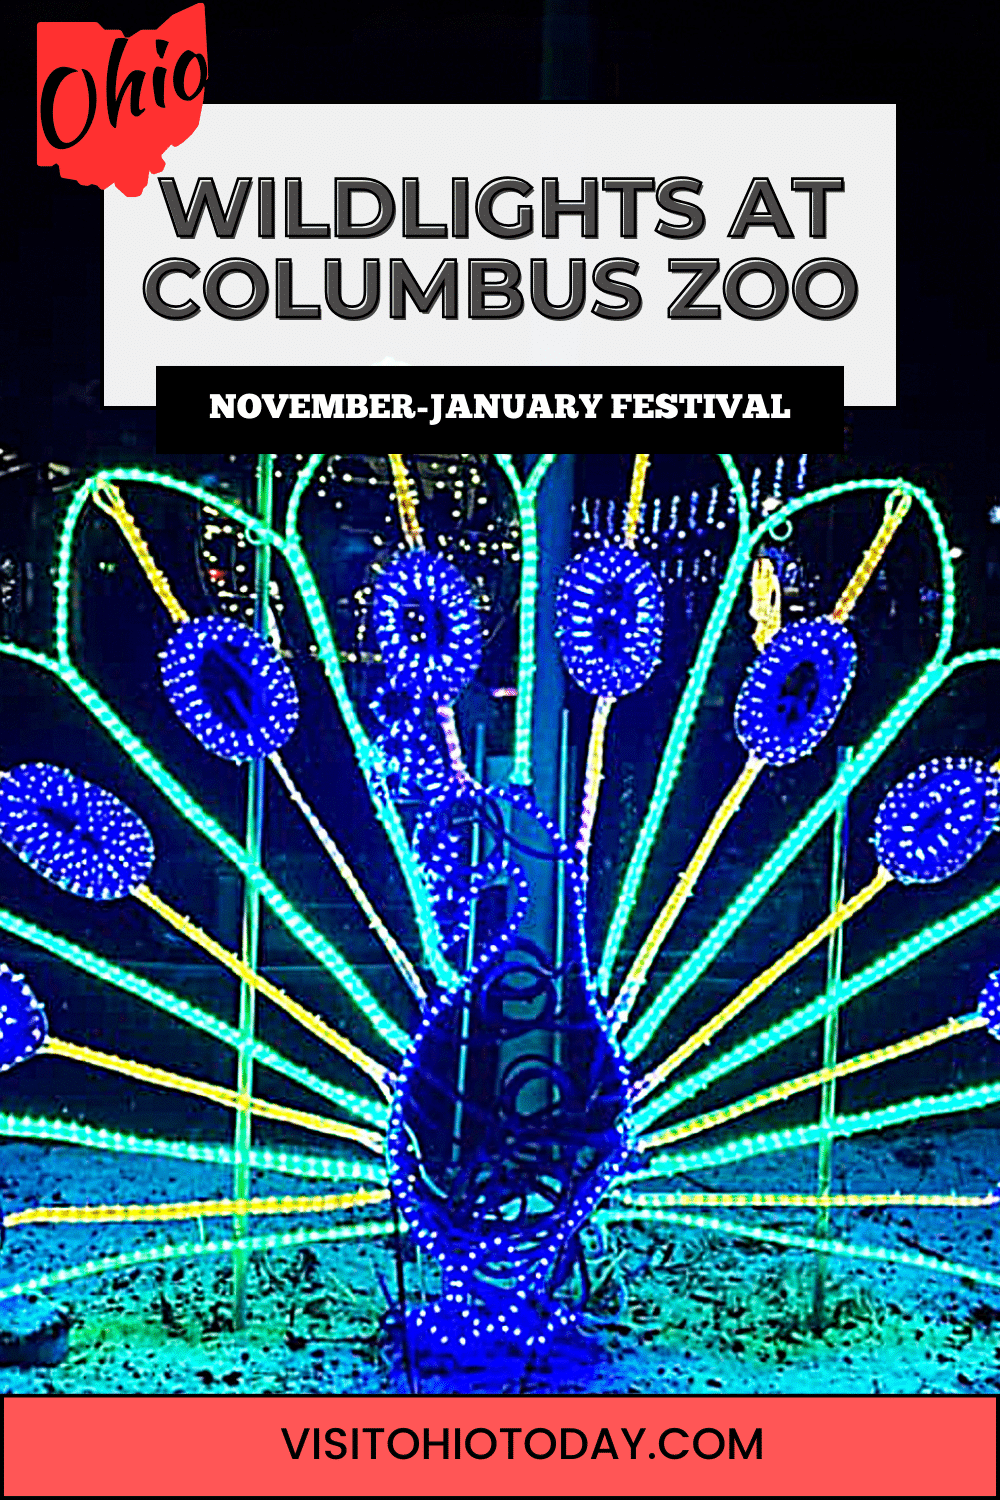 Columbus Zoo springs to life during the evenings from November 17 to January 7. Enjoy all the sights and sounds of winter at the zoo with millions of LED lights!